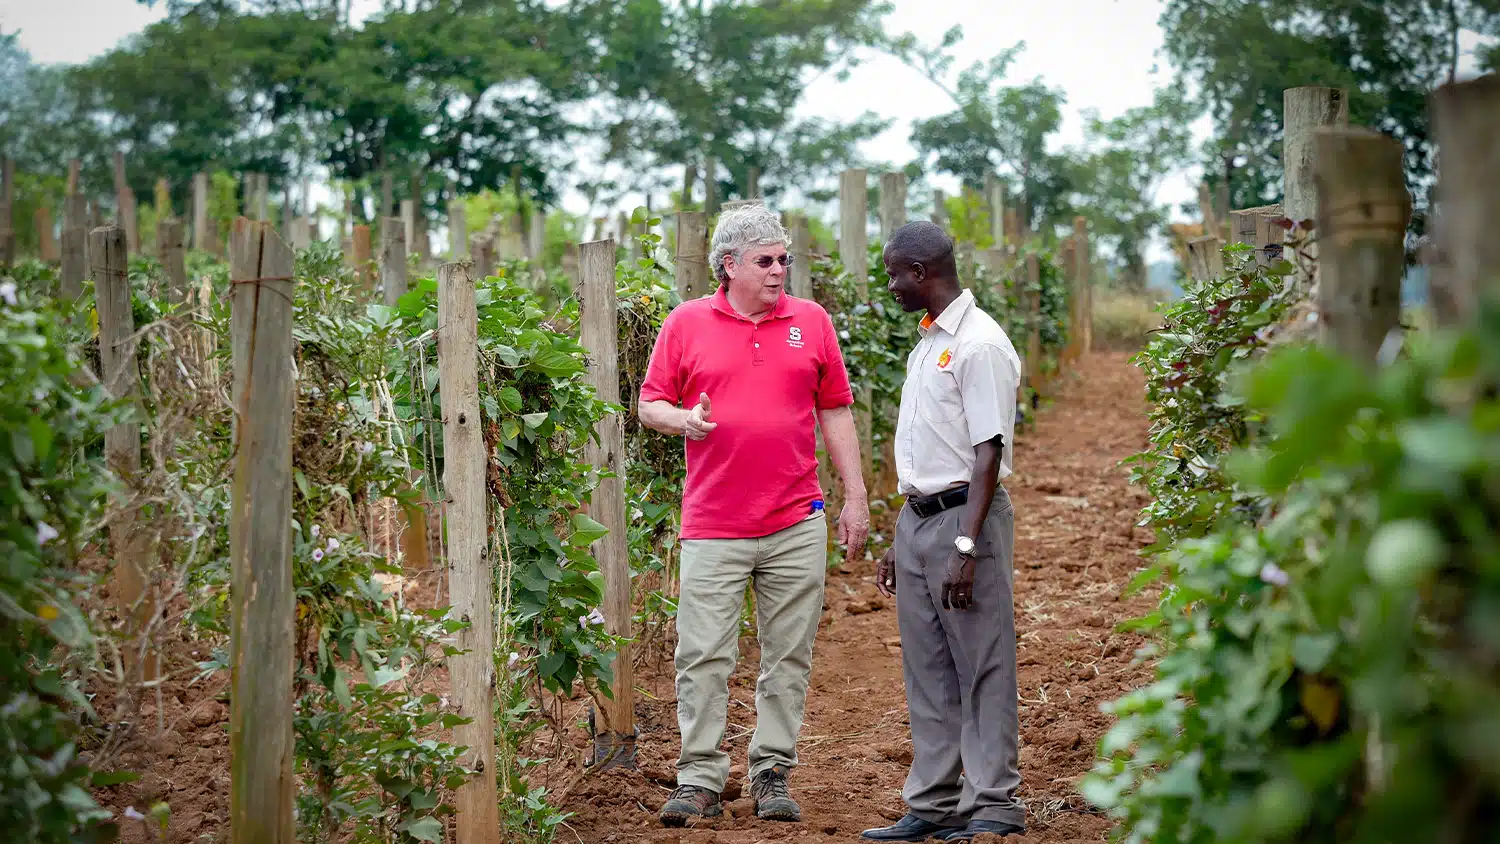 Craig Yencho speaks with an African researcher in a plot of crops.